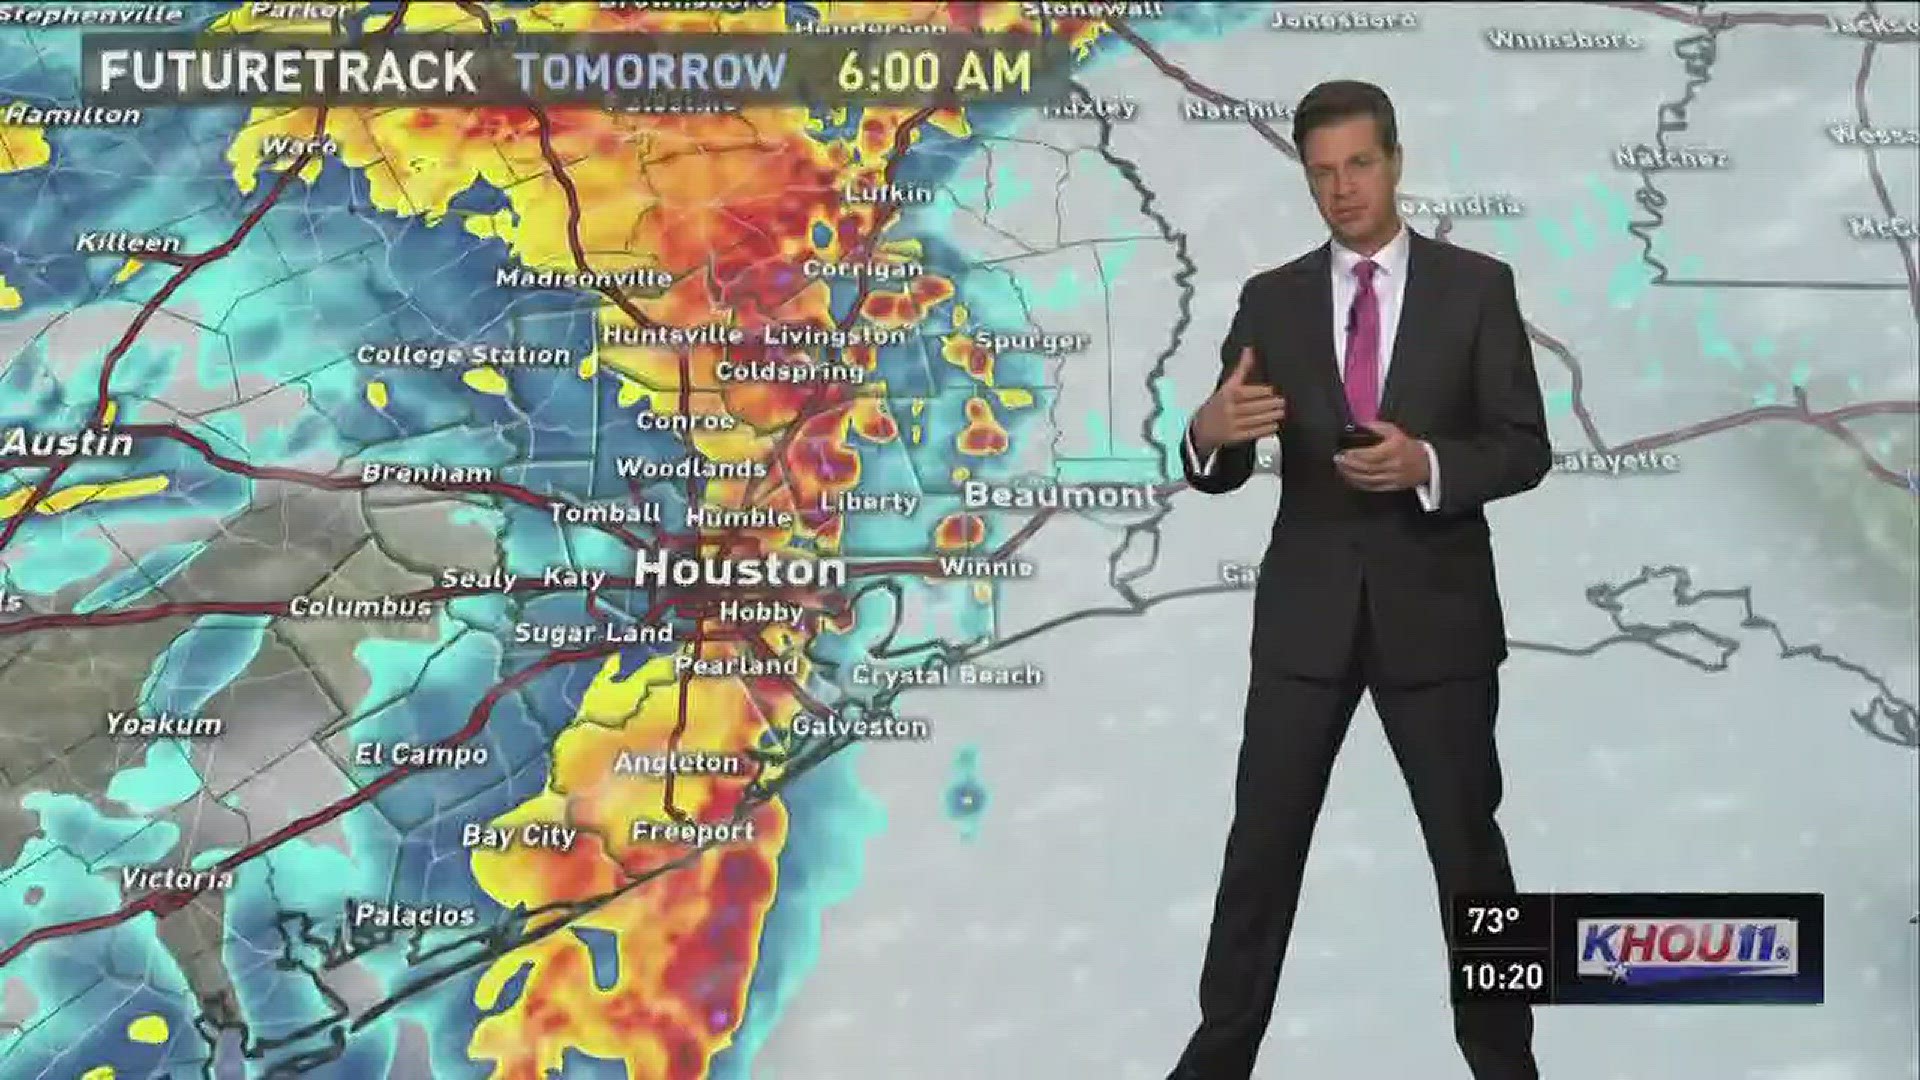 KHOU 11 Chief Meteorologist David Paul says there will be heavy rain overnight and for most of Wednesday.